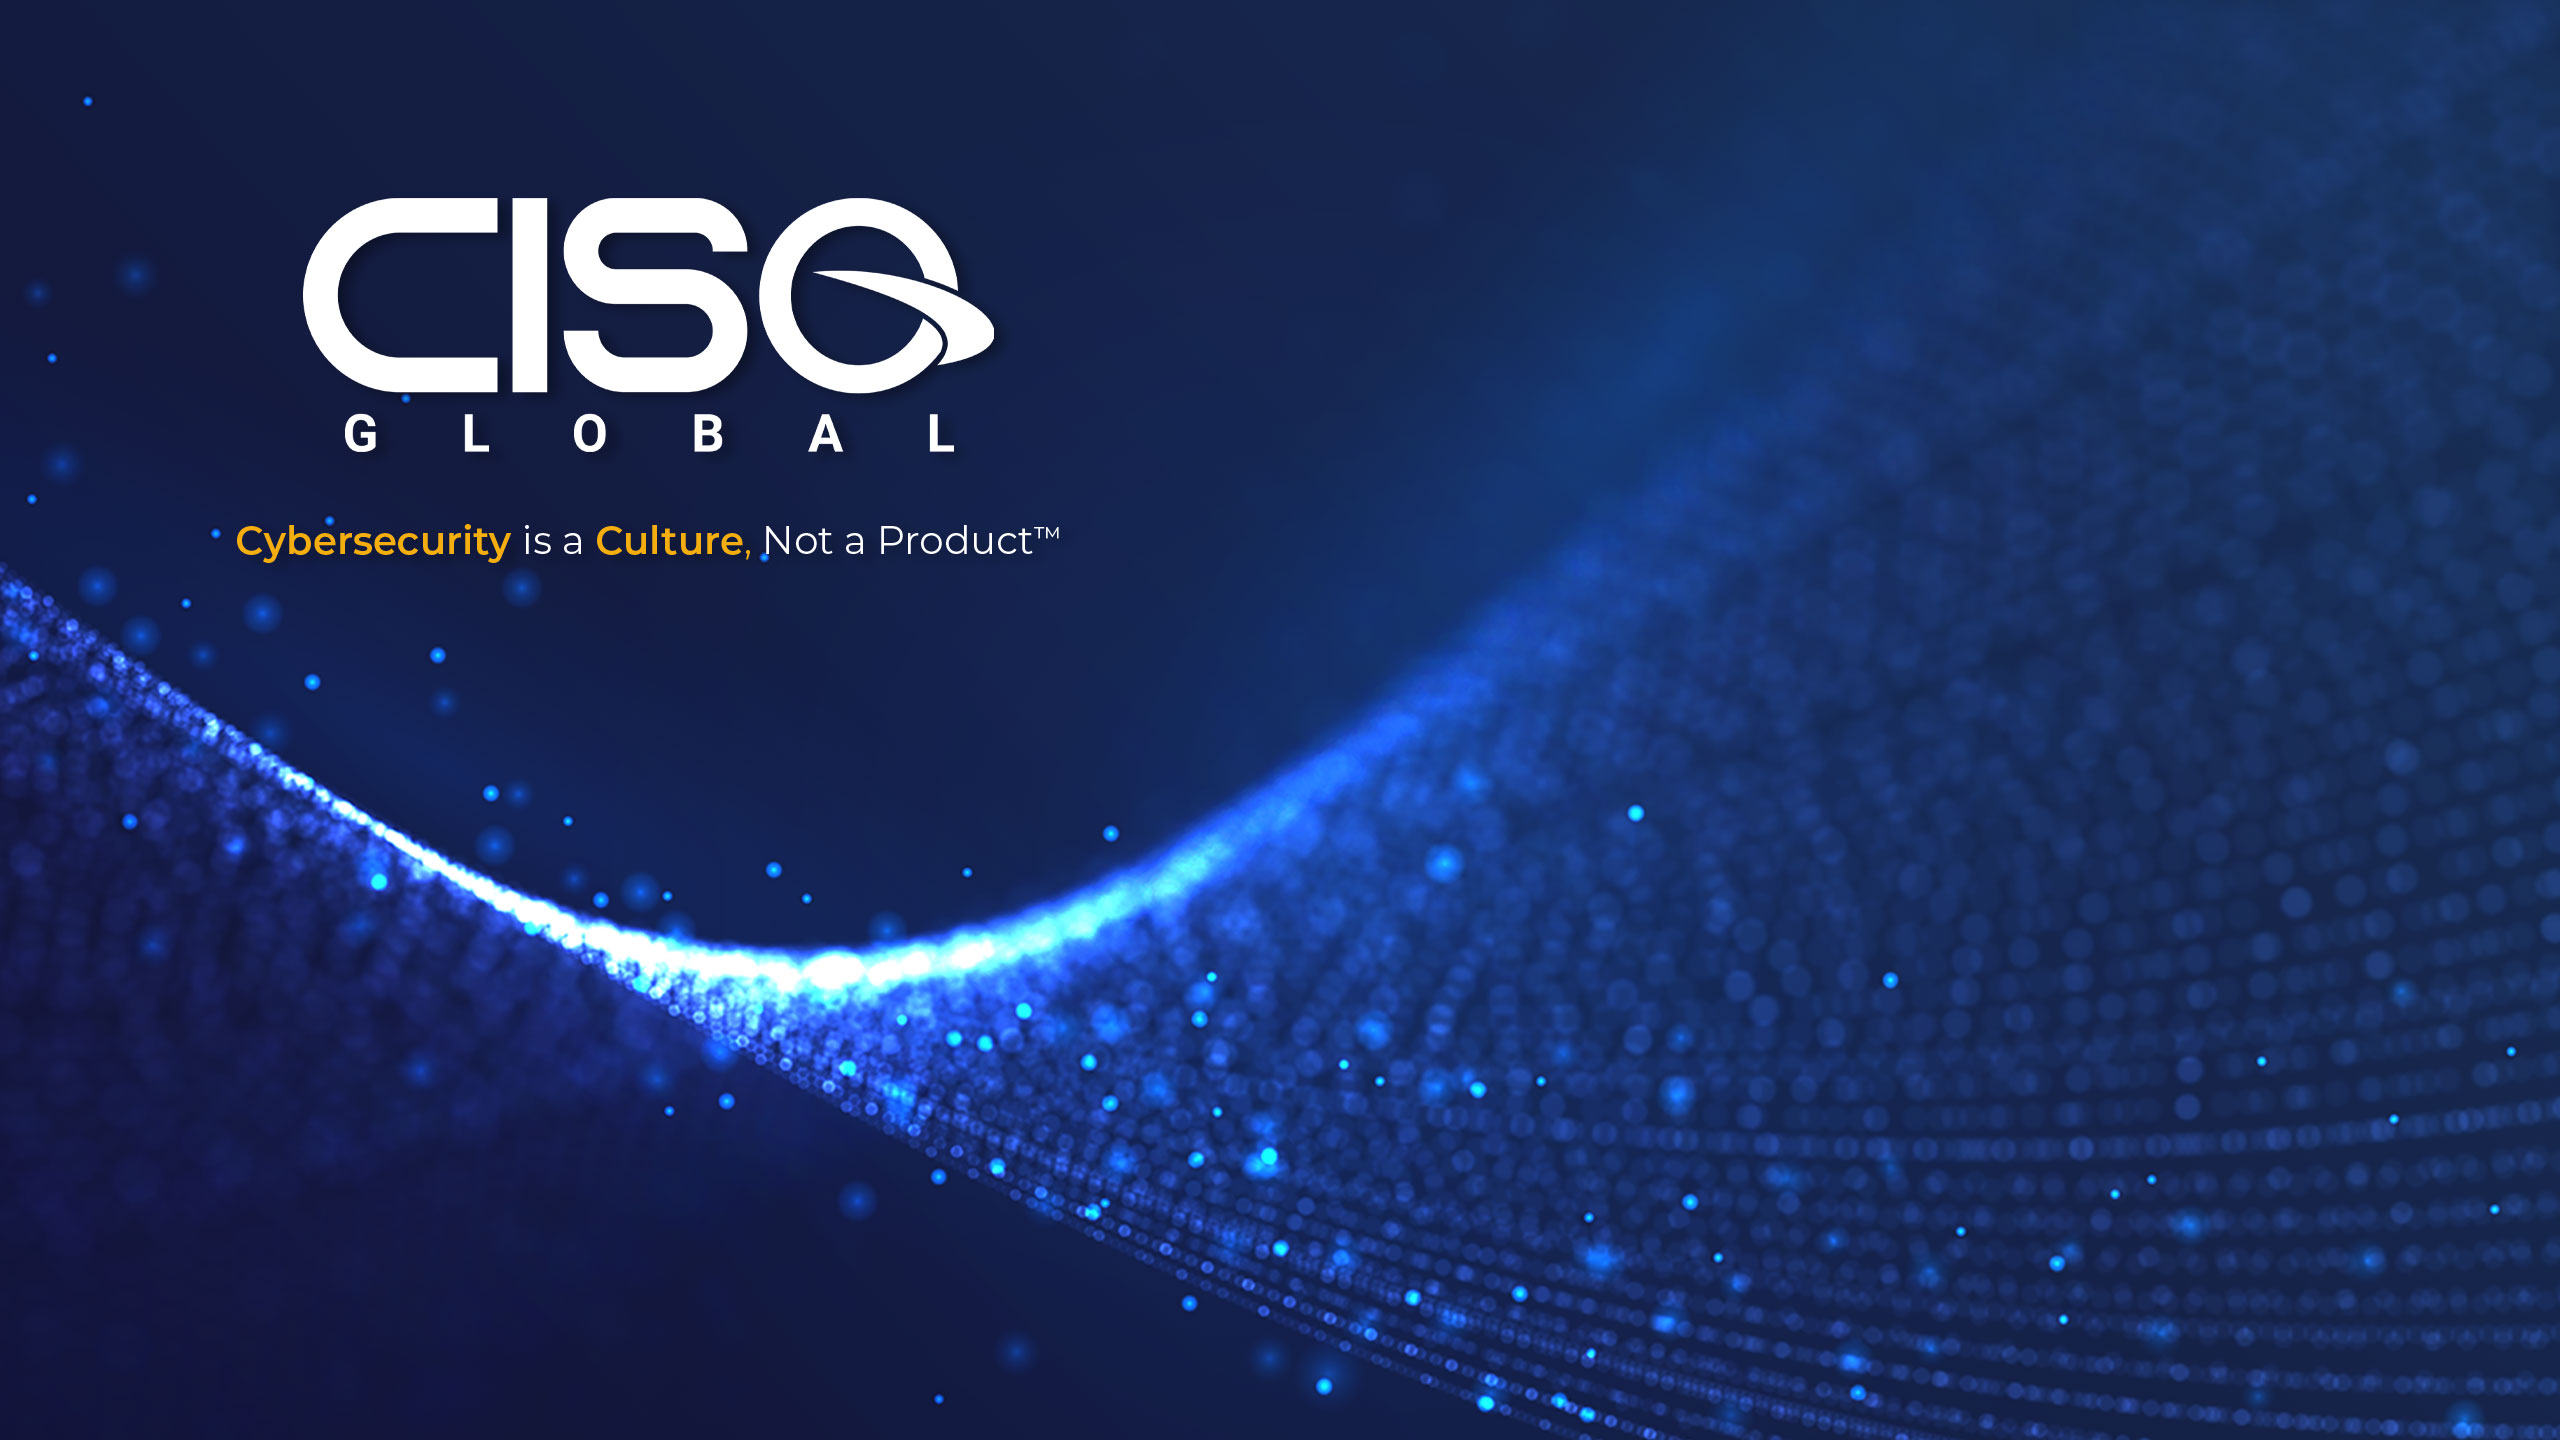 CISO Global Stock Higher By 20% In November As Investors Reappraise The Value Proposition ($CISO)